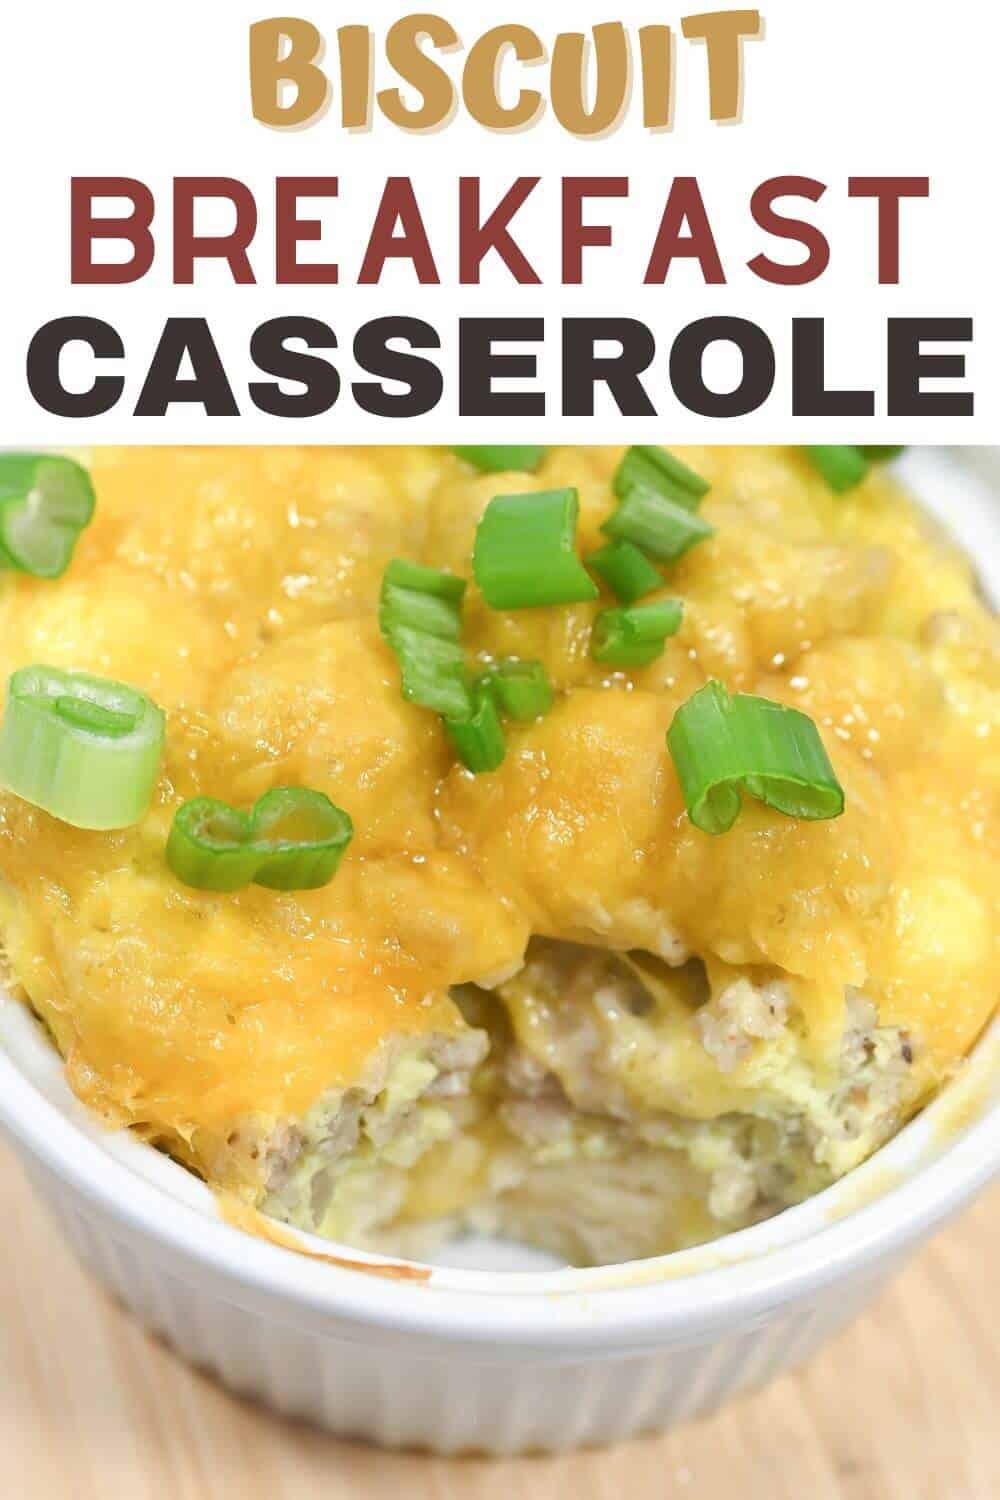 A cheesy biscuit breakfast casserole topped with sliced green onions.